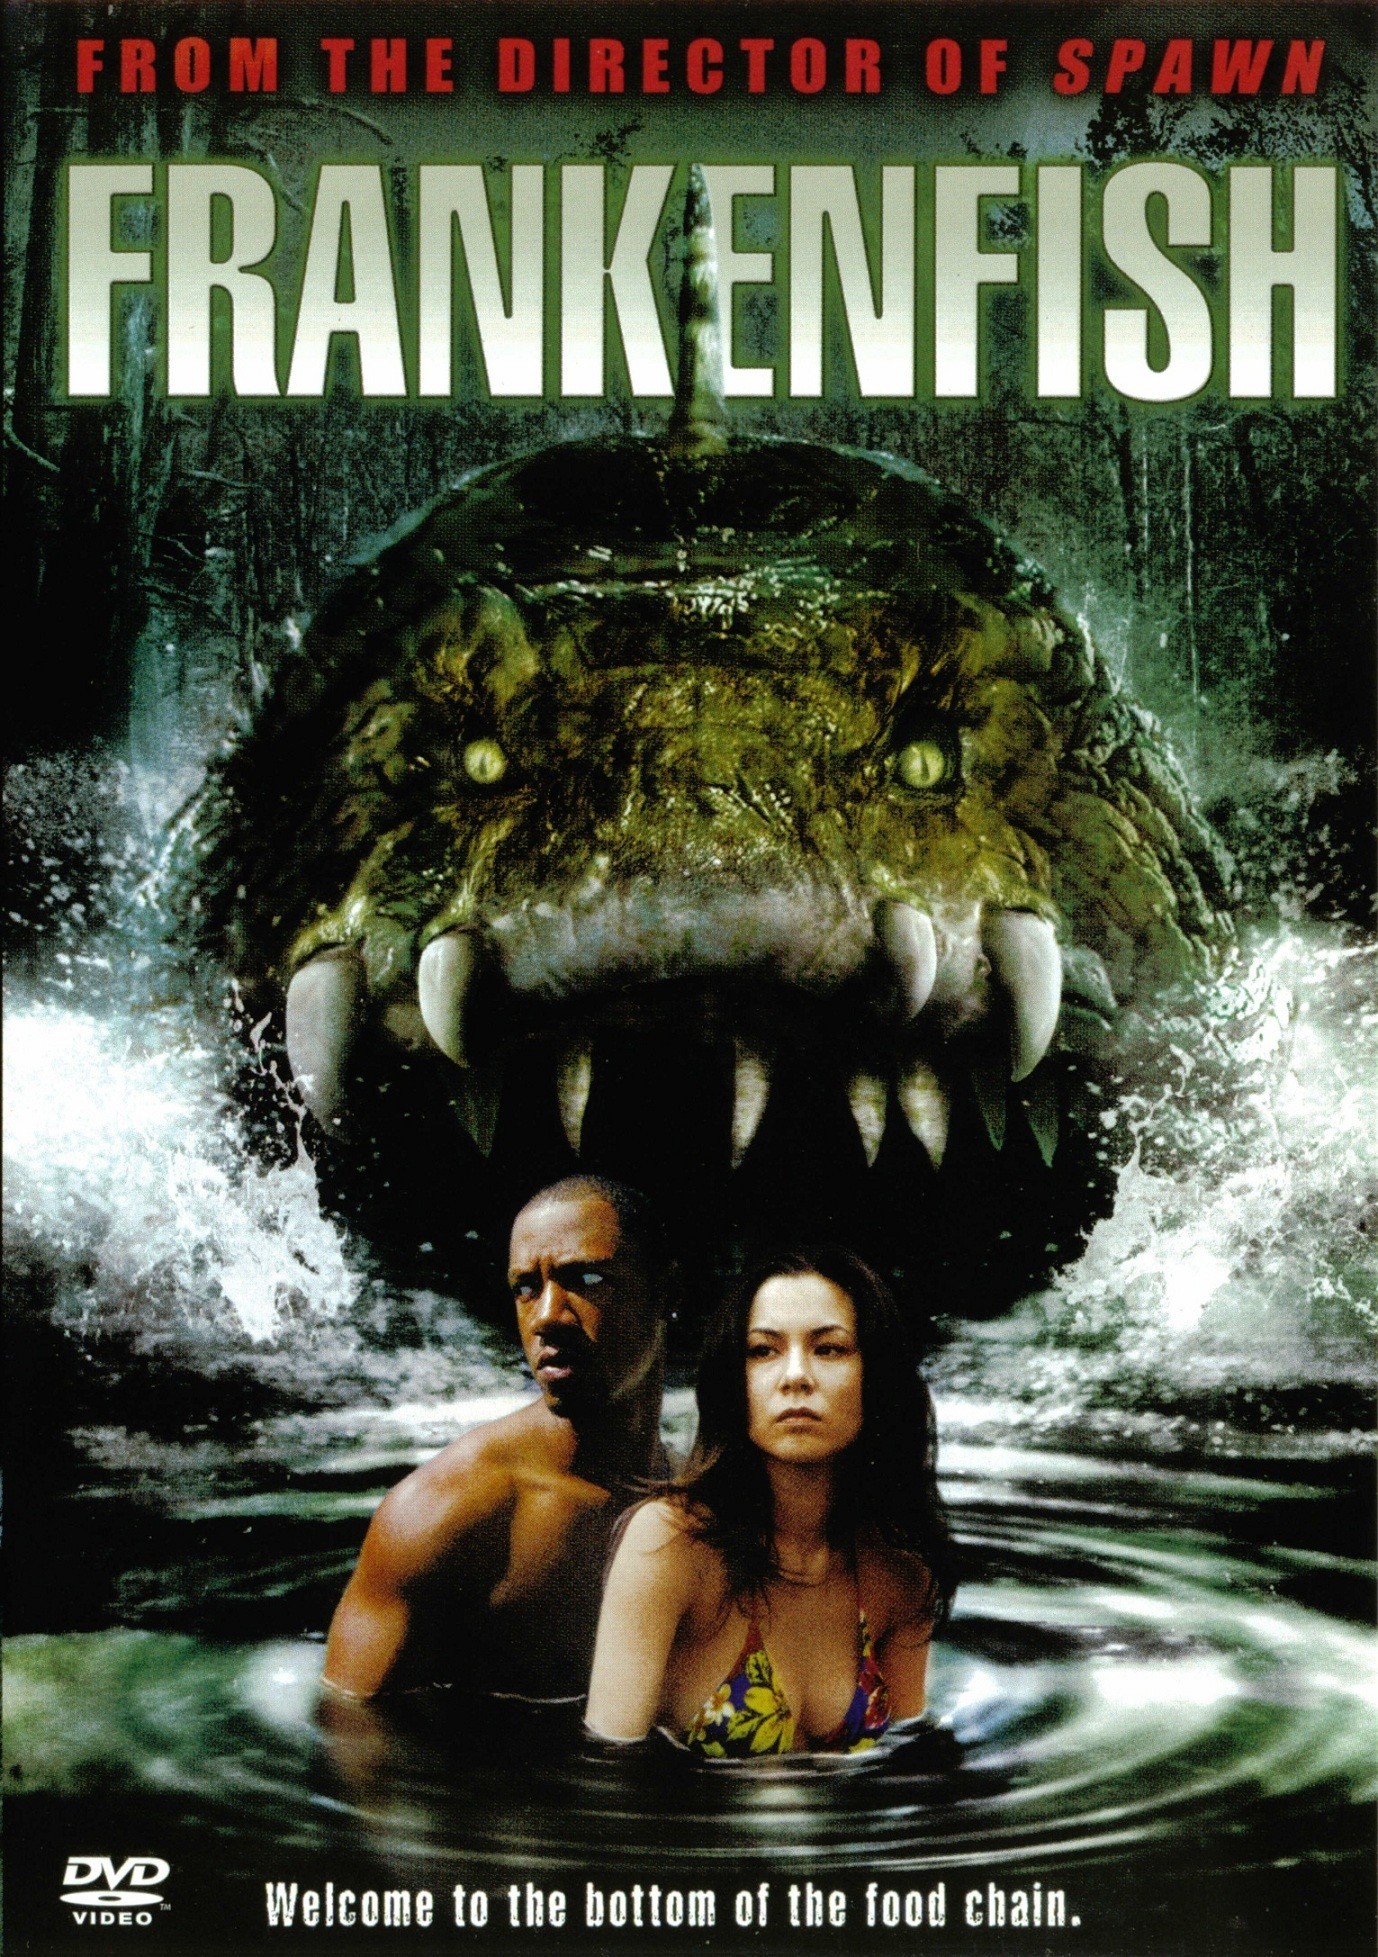 Poster for the movie "Frankenfish"